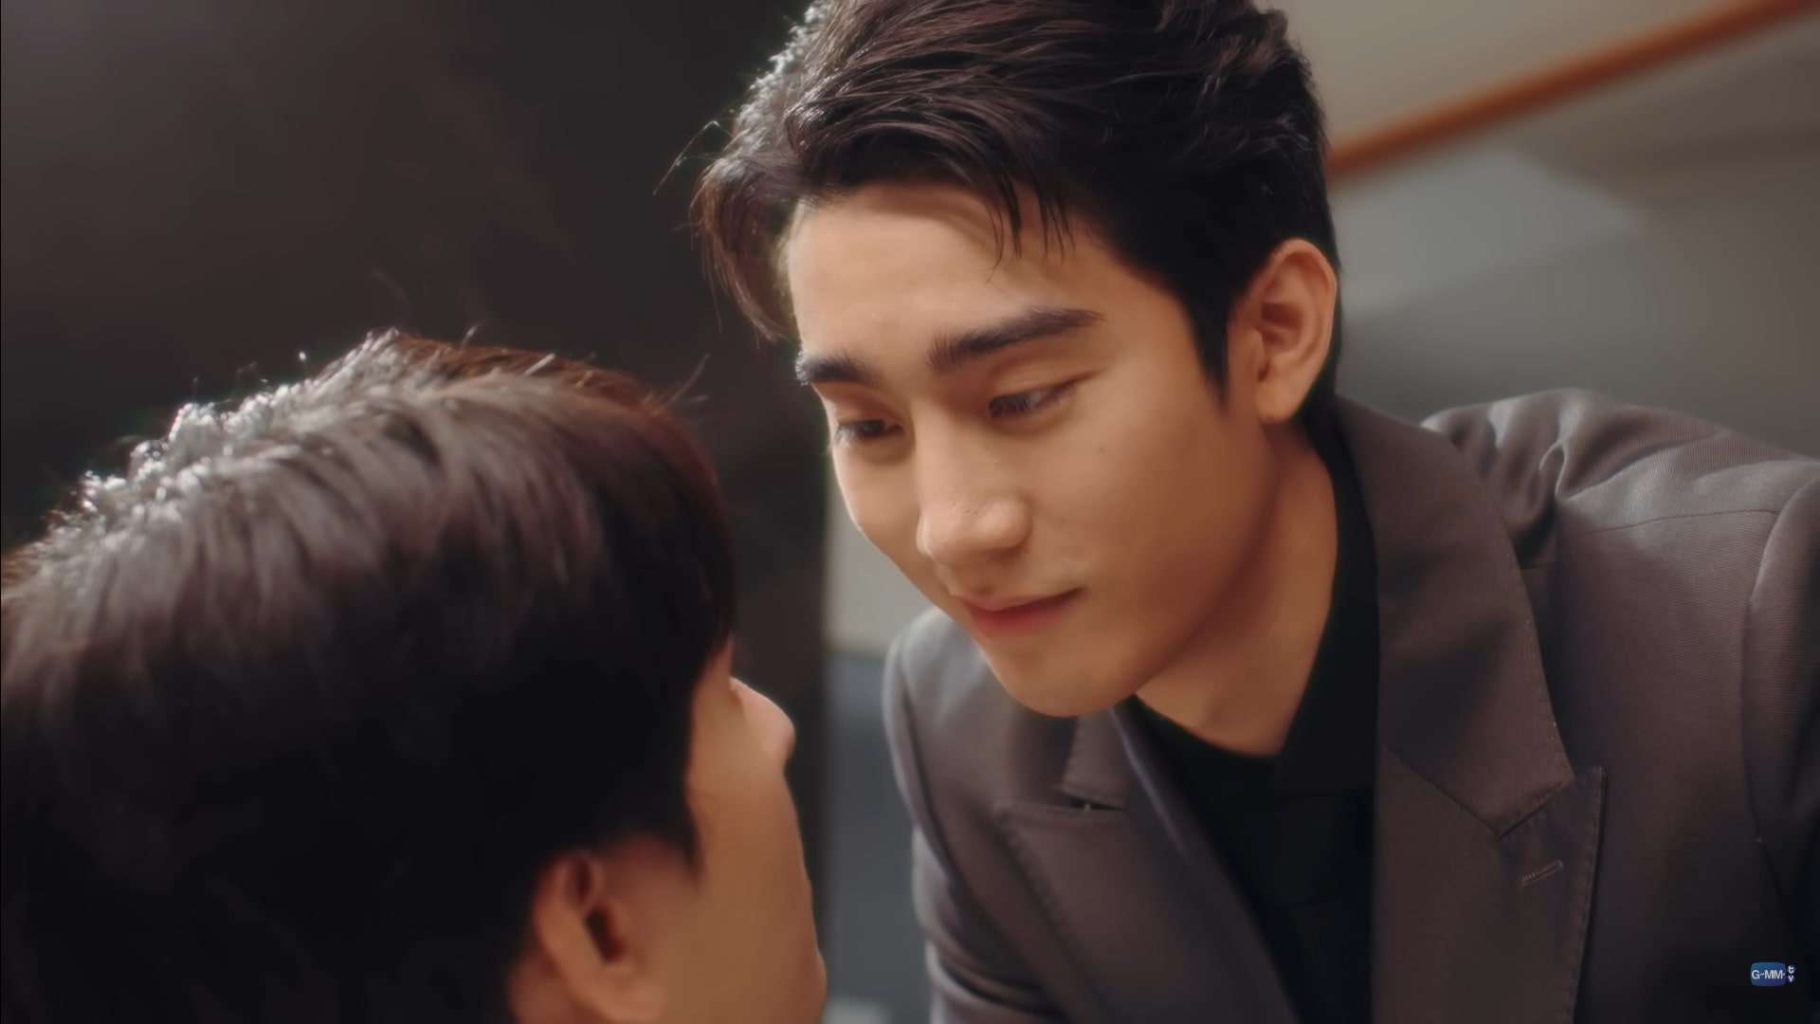 A Boss And A Babe Episode 4: Gun’s Confession, Cher & Jack’s Quarrel! Know Streaming Guide Here